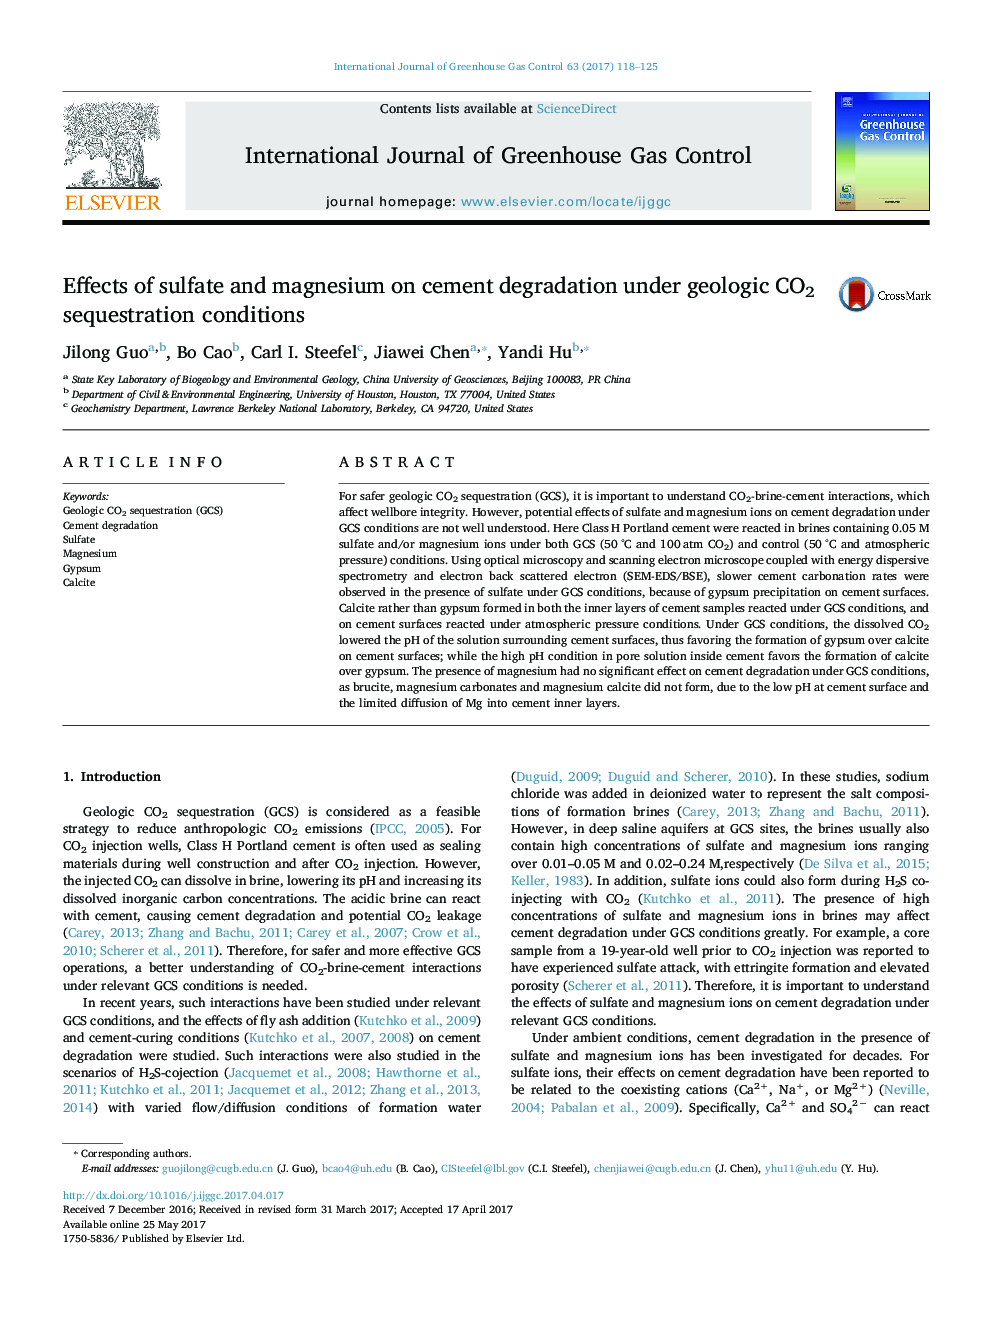 Effects of sulfate and magnesium on cement degradation under geologic CO2 sequestration conditions